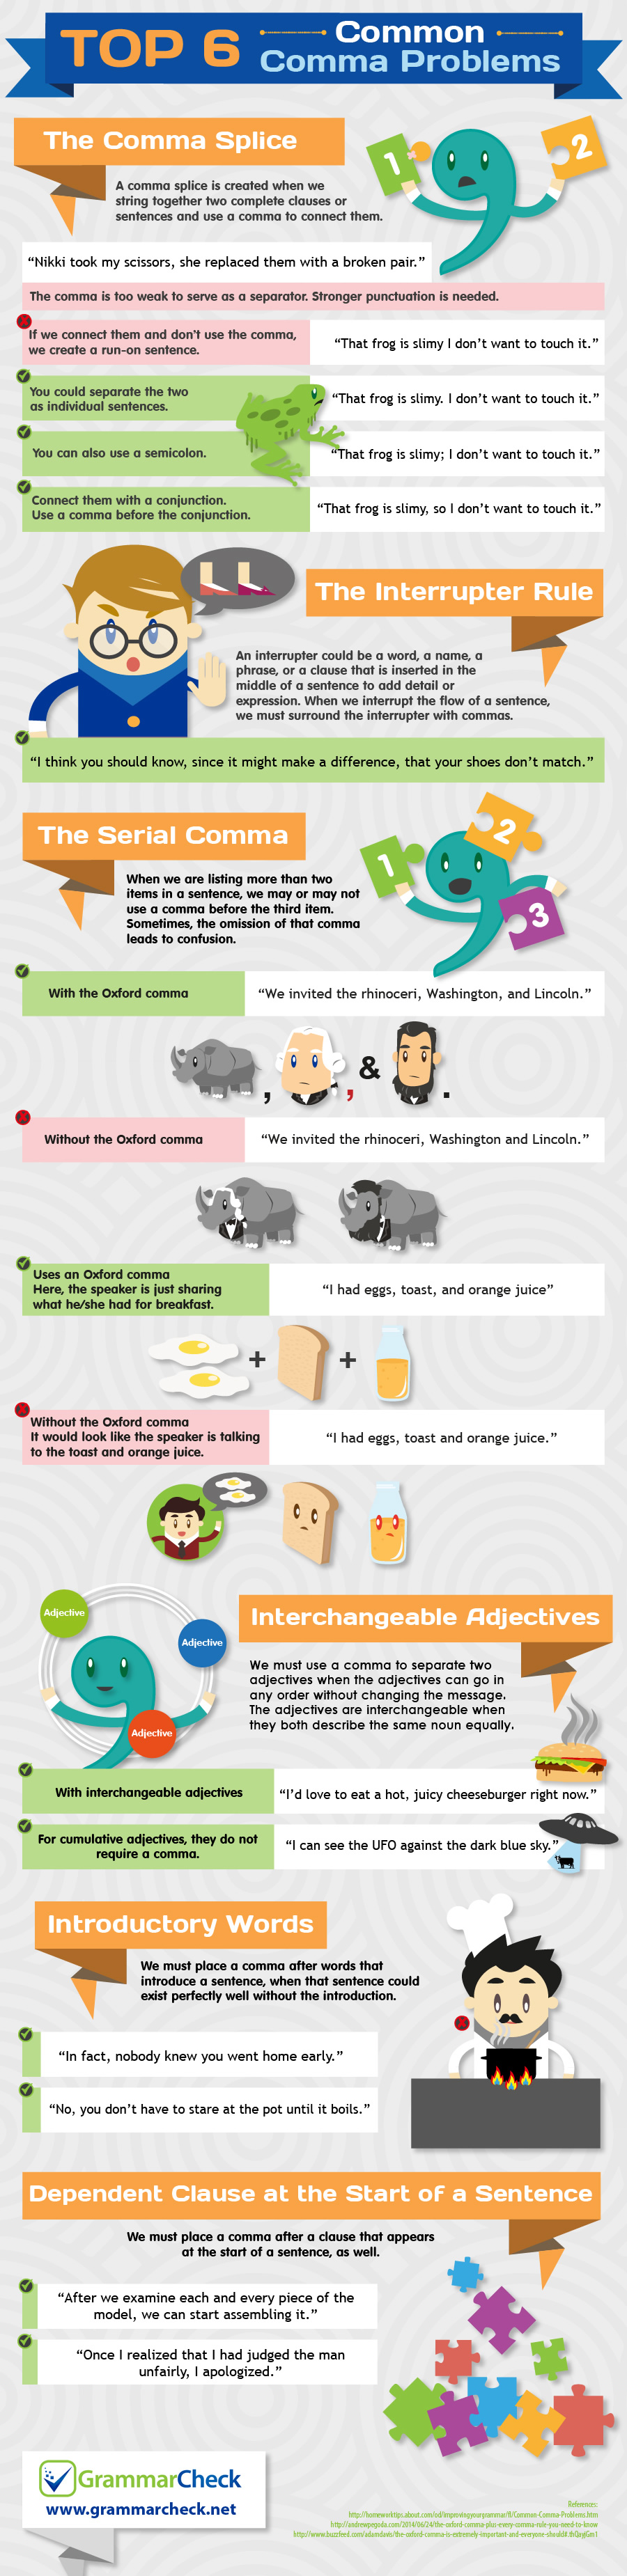 Top 6 Common Comma Problems (Infographic)